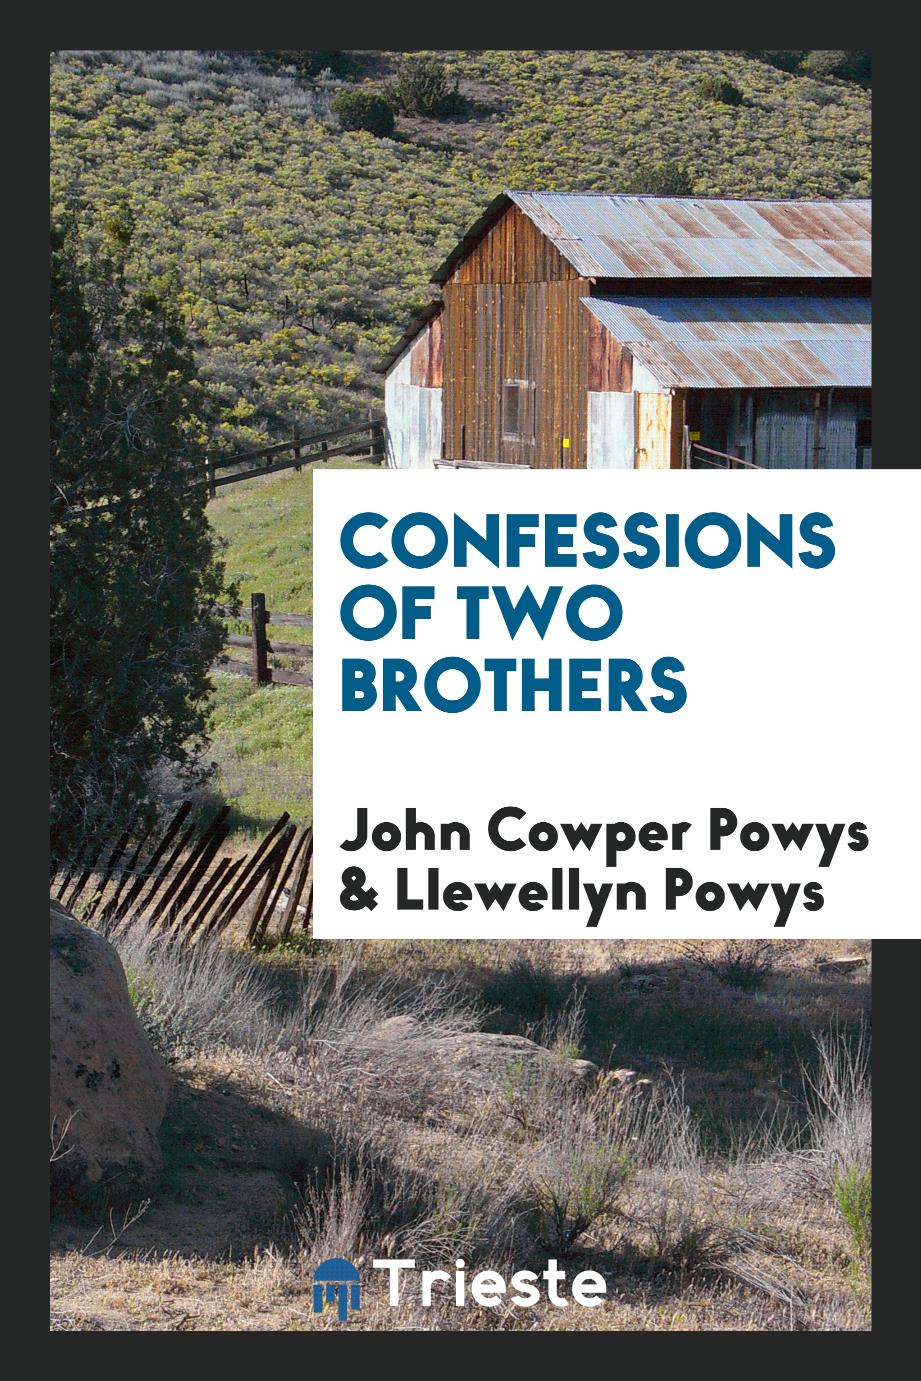 Confessions of two brothers